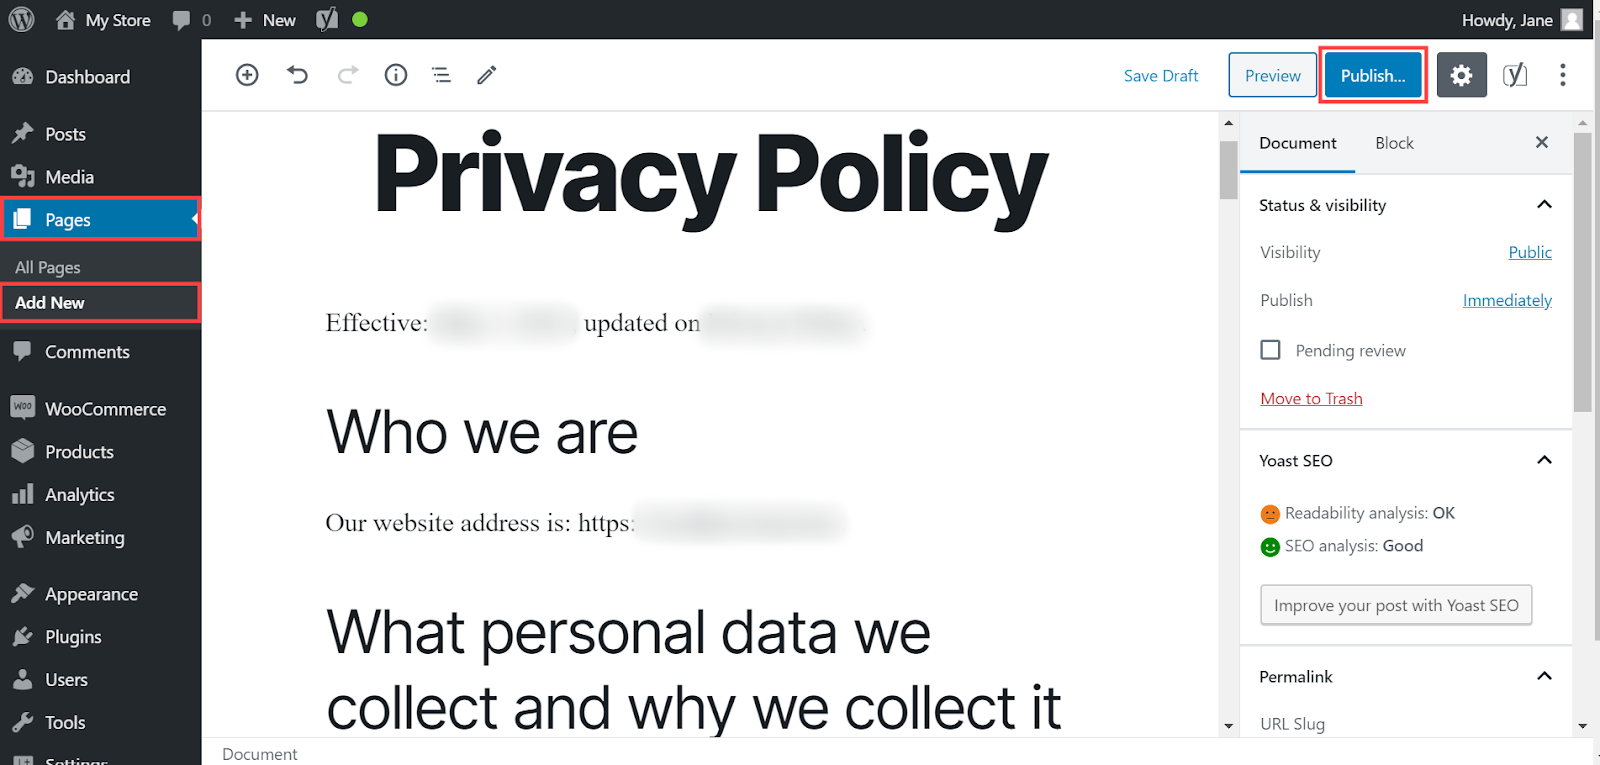 How to Make Your WooCommerce Website GDPR Compliant?